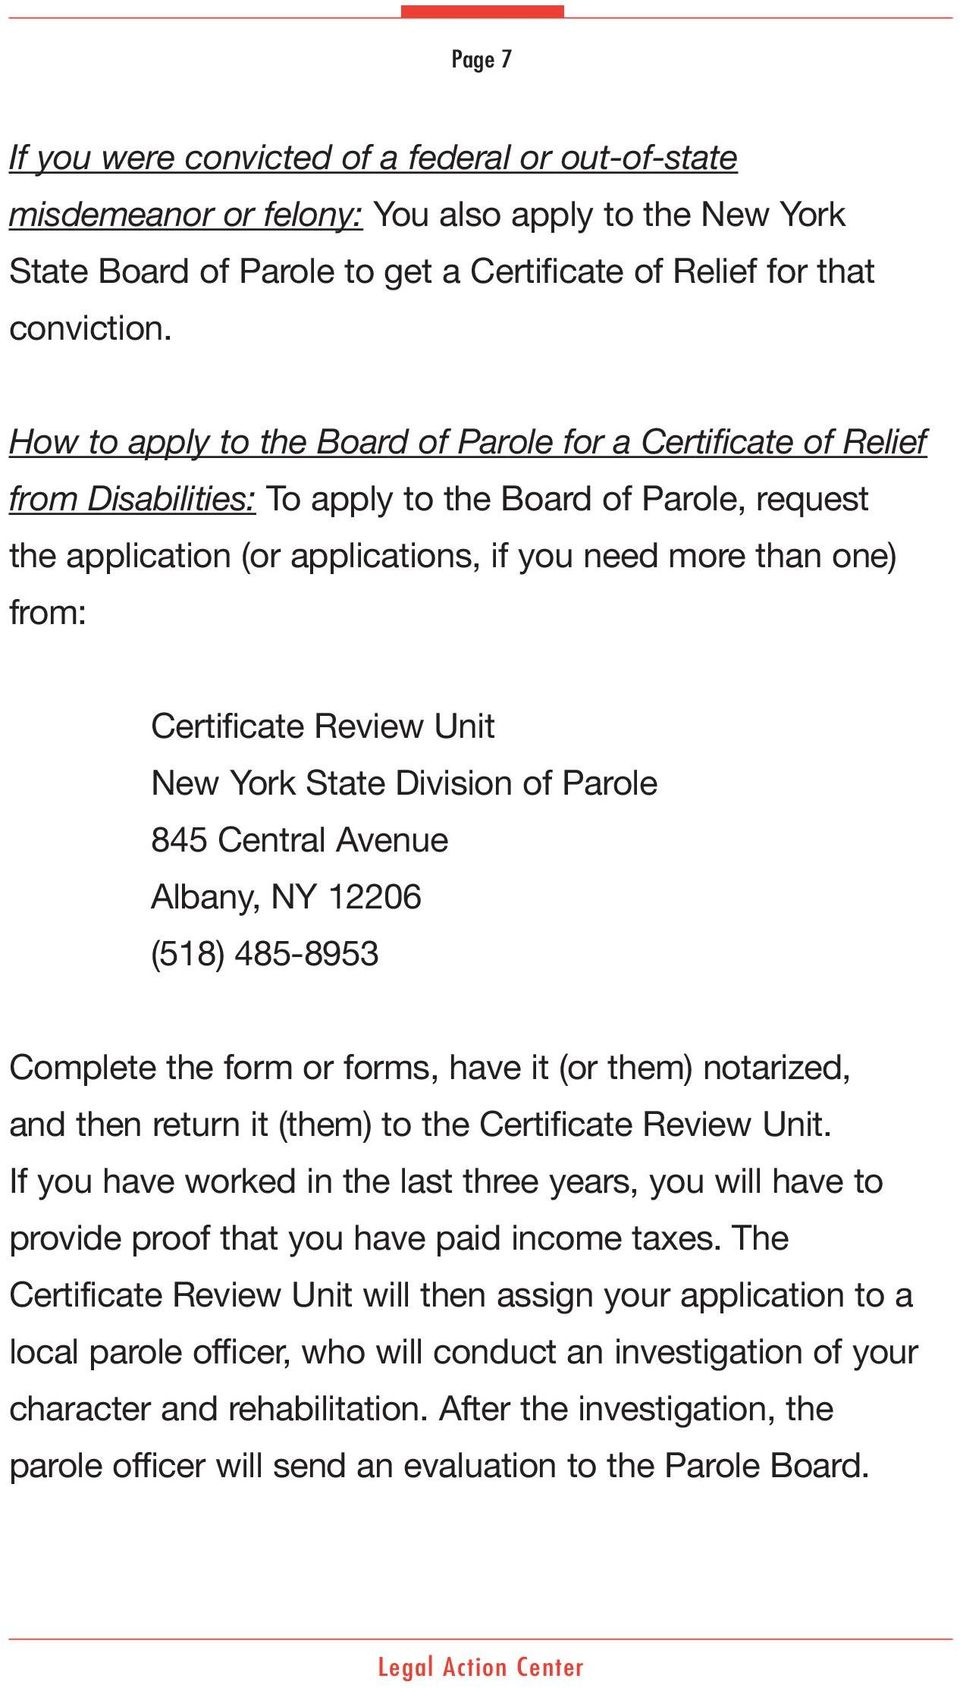 Certificate Review Unit New York State Division of Parole 845 Central Avenue Albany, NY 12206 (518) 485-8953 Complete the form or forms, have it (or them) notarized, and then return it (them) to the